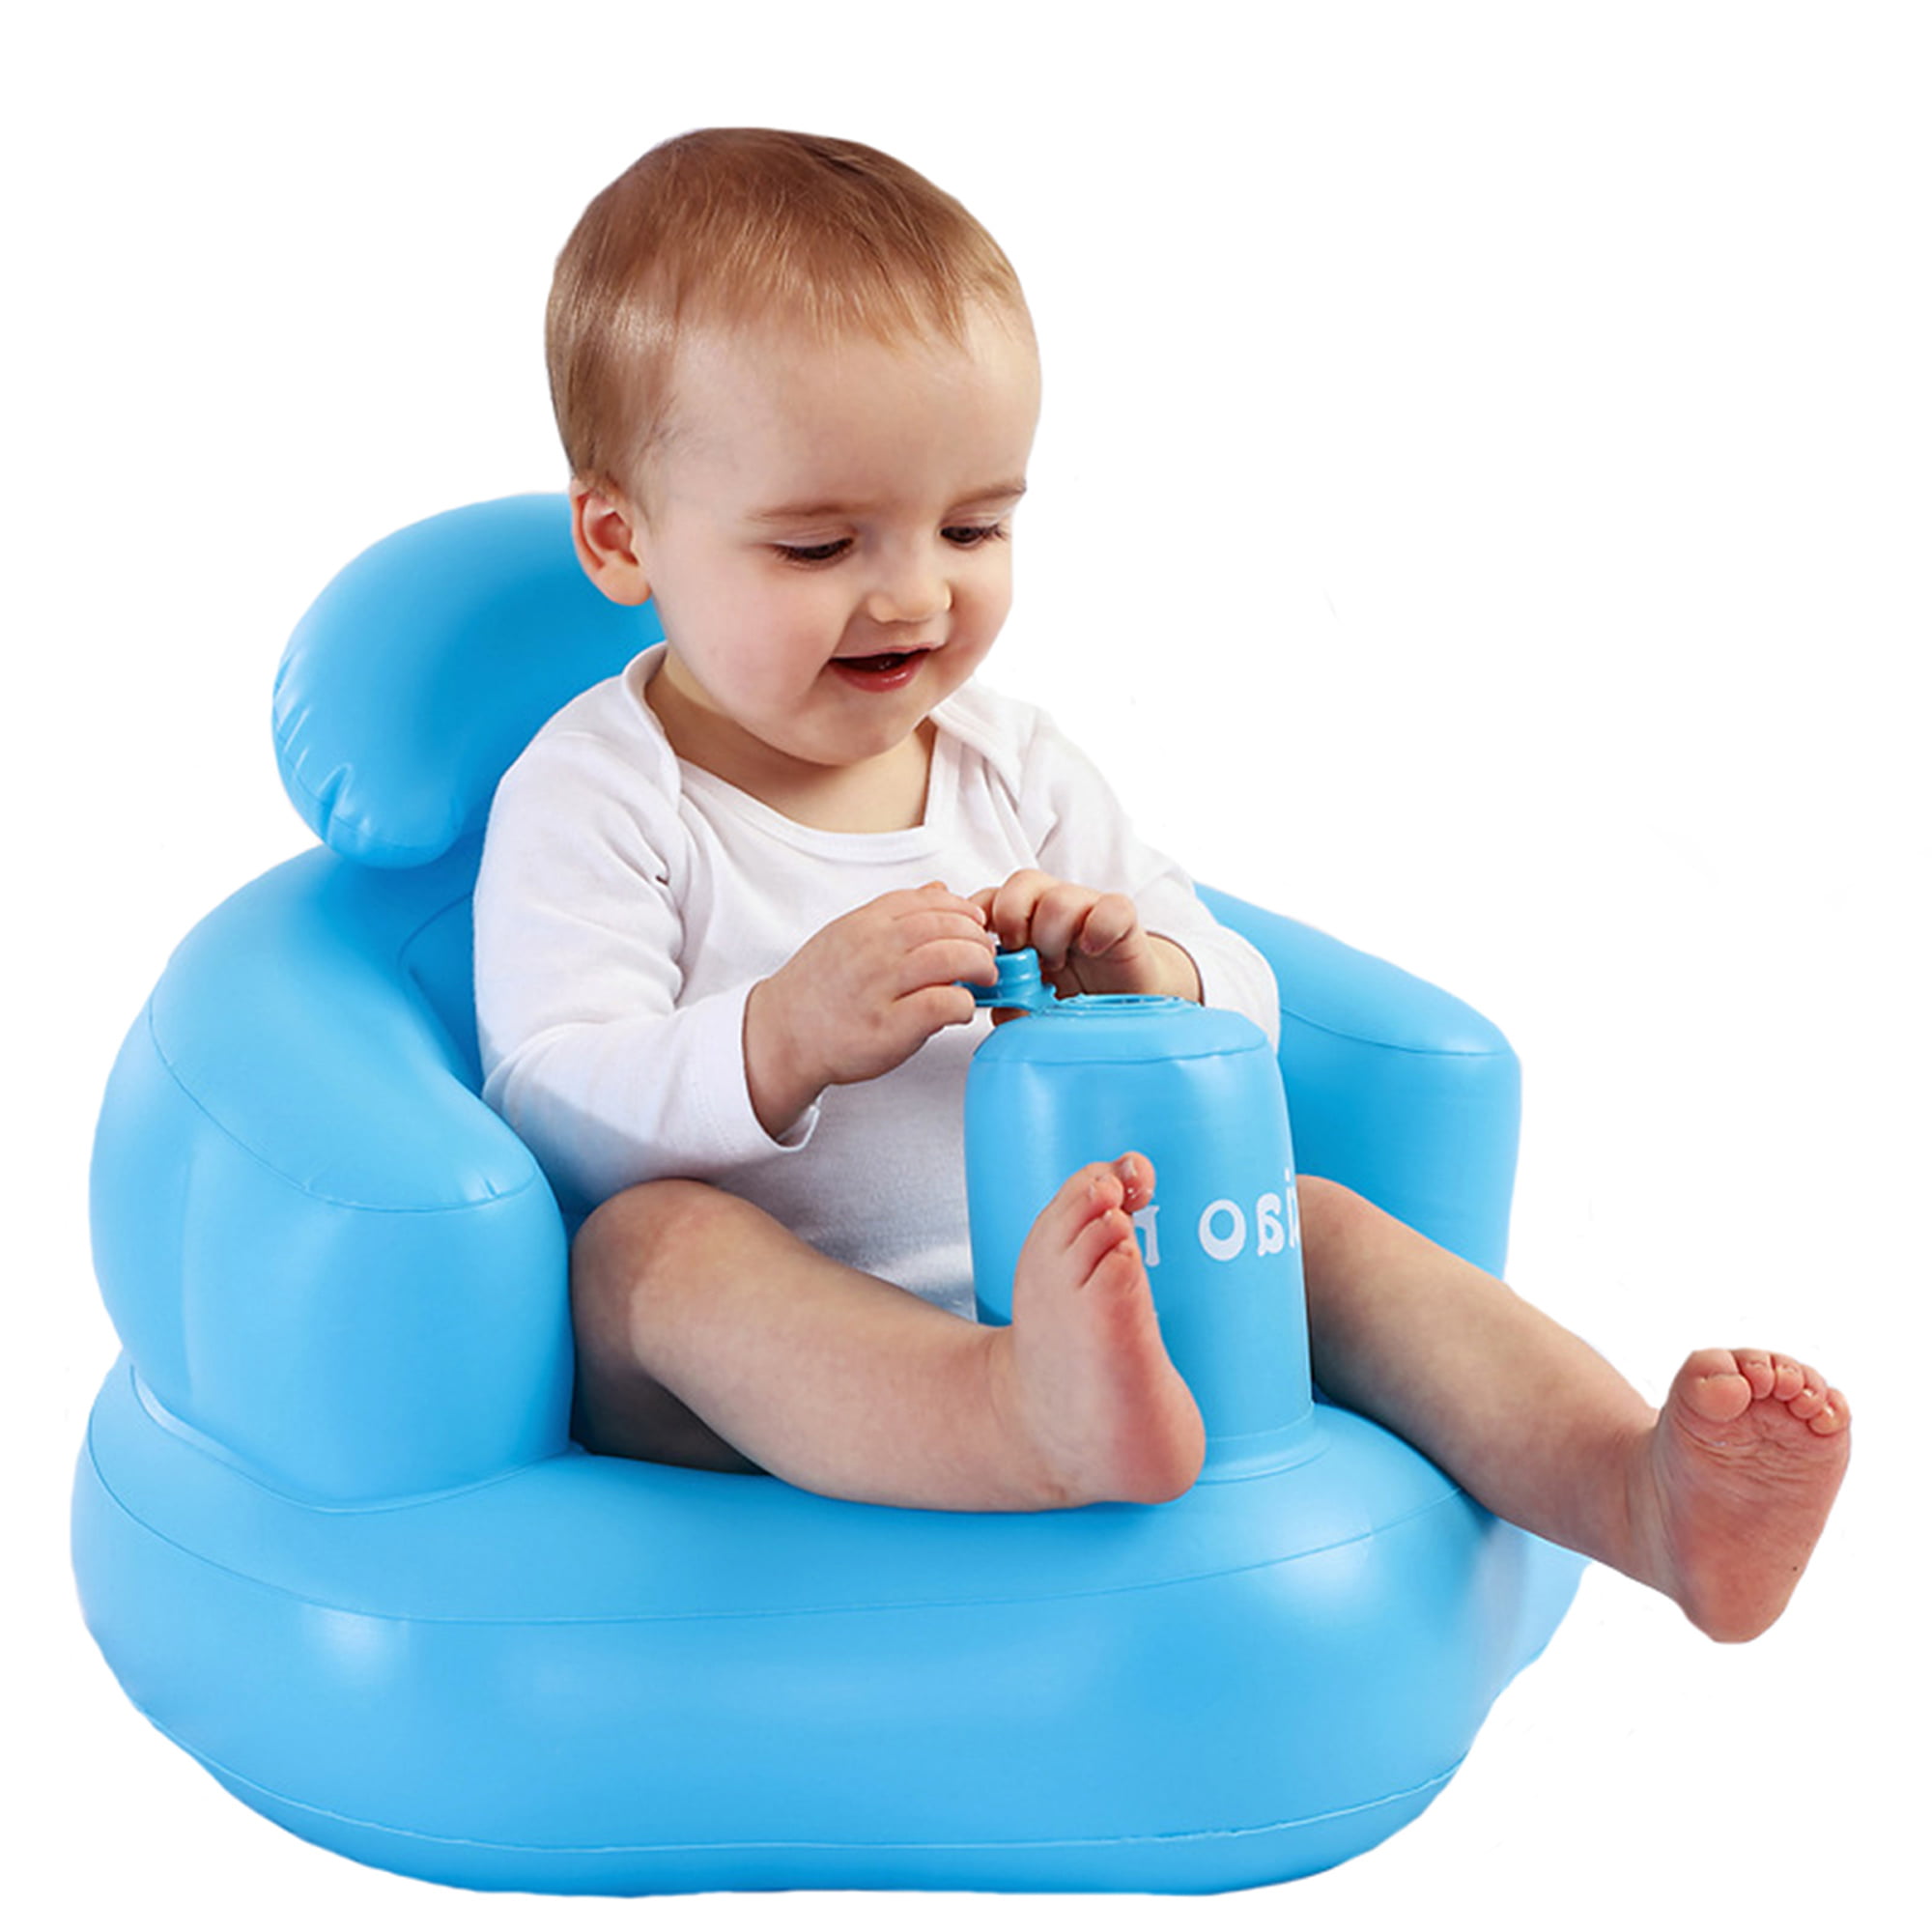 Baby Sofa Inflatable Kid Infant Toddlers Learn stool Chair Training Bath Seat JM 